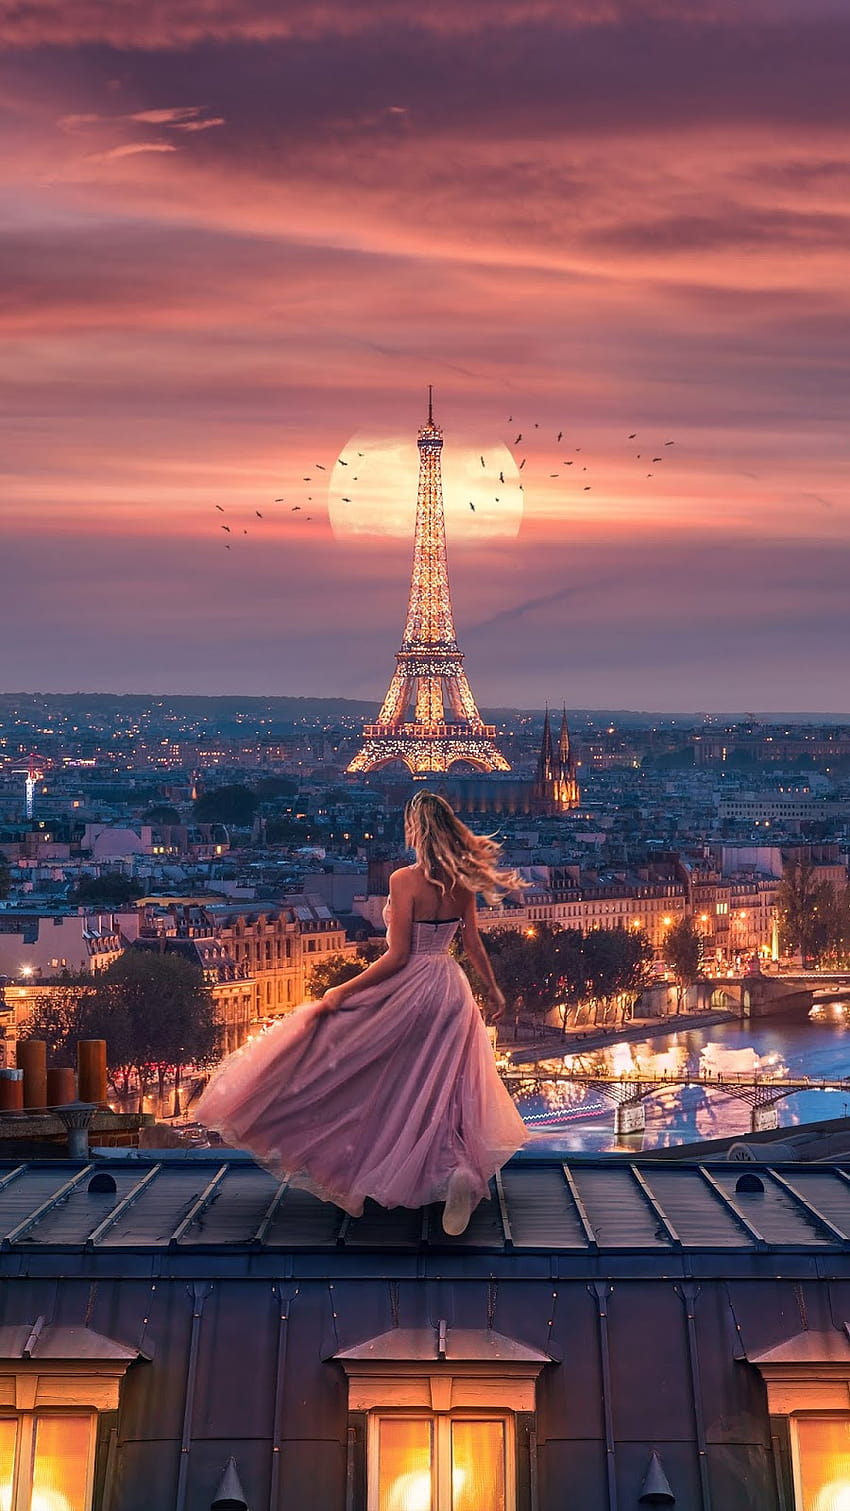 Romantic Paris Tower 300 Piece Puzzle, Landmarks Anime Style Puzzle  Interesting Stress Reduction Jigsaw Puzzles, Funny Holiday for Adults-  Cardboard Puzzles- Relax Puzzles Games-Brain Teaser Puzzle 3 :  Amazon.co.uk: Toys & Games